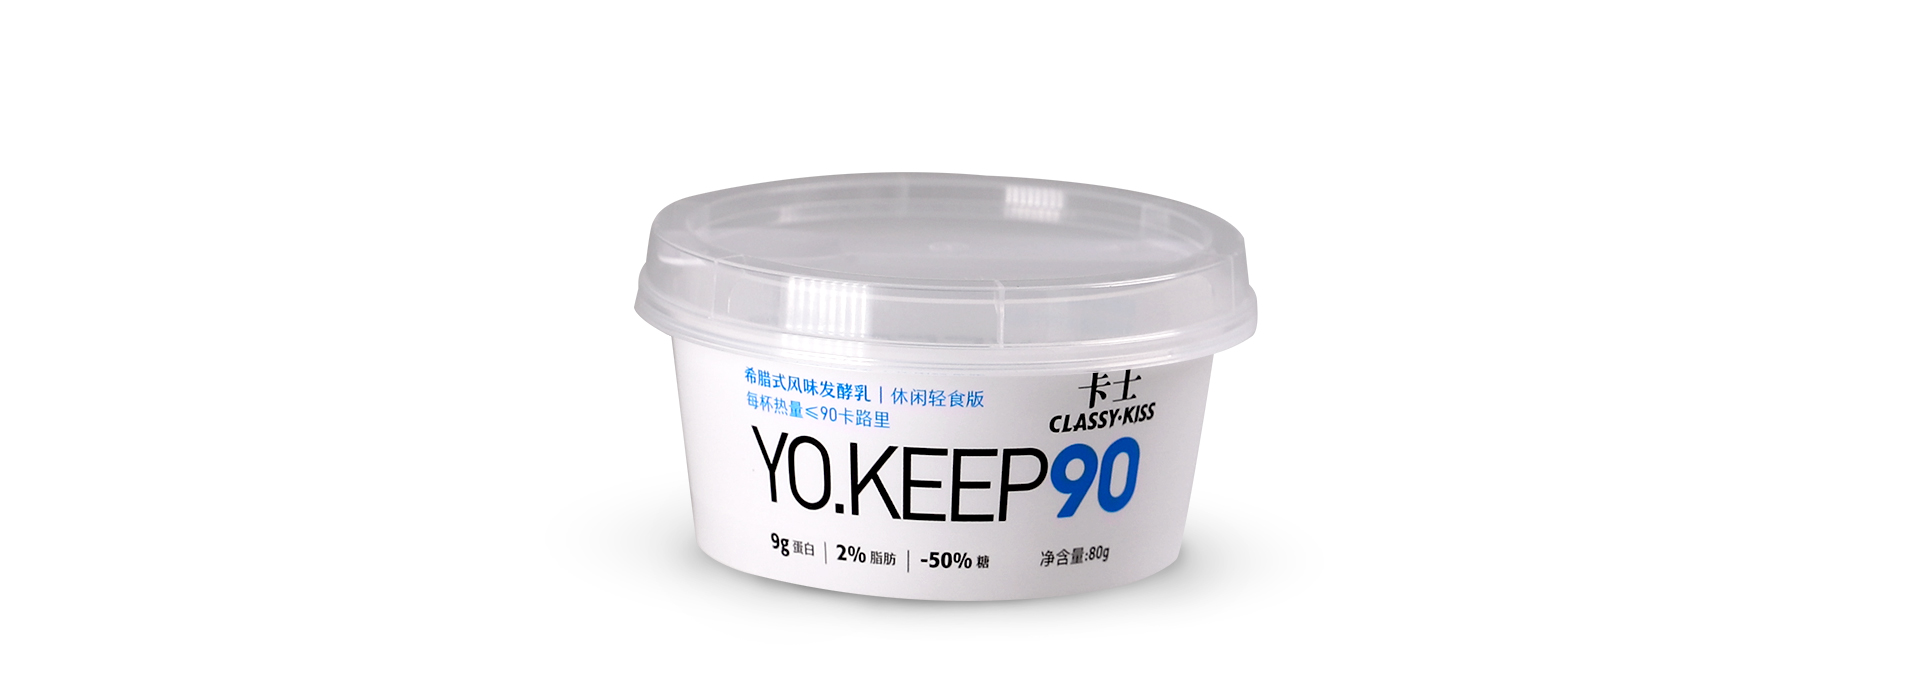 Lc-2 yoghurt cup (cover and spoon 88 calibre)